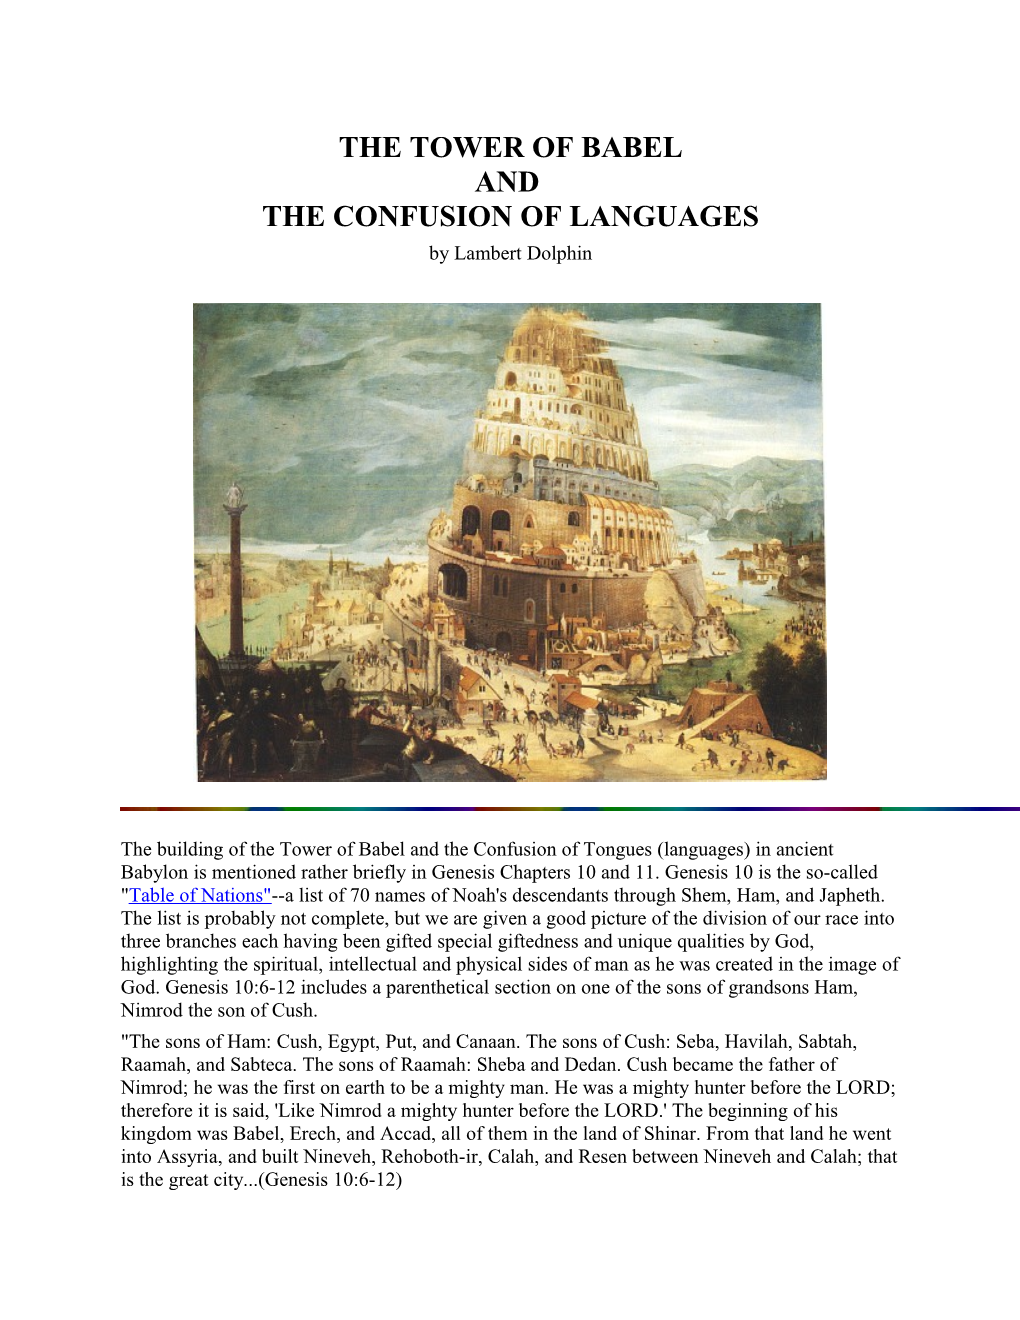 The Tower of Babel and the Confusion of Languages